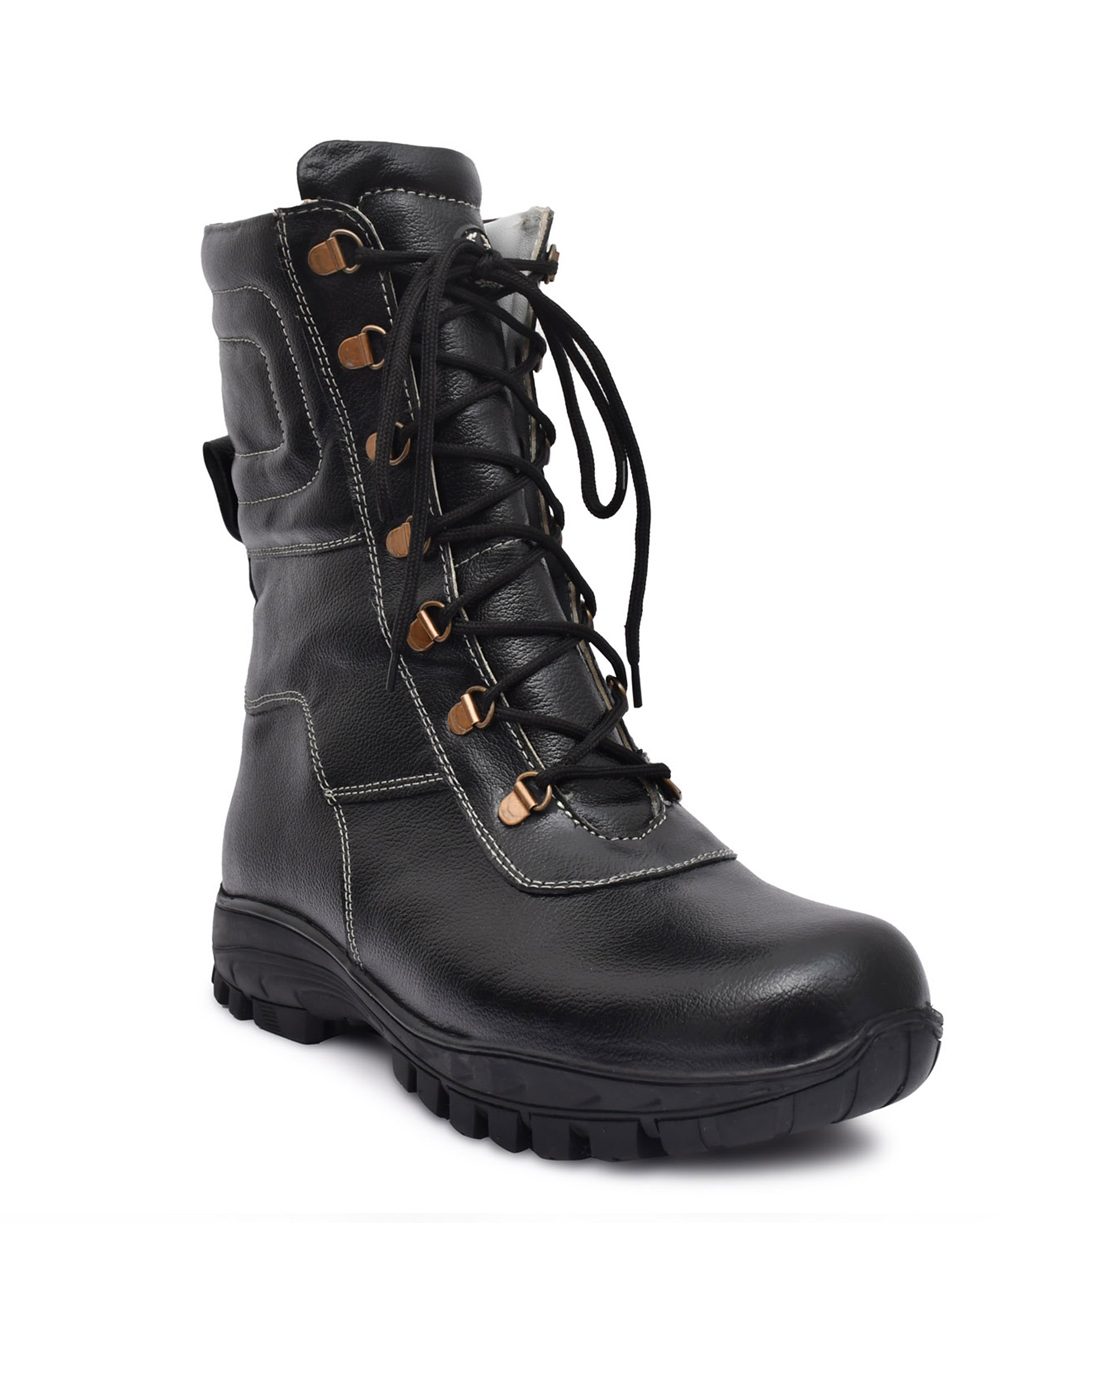 Biker Boots : Pure leather, Steel Toe with Rubber Sole by ASM